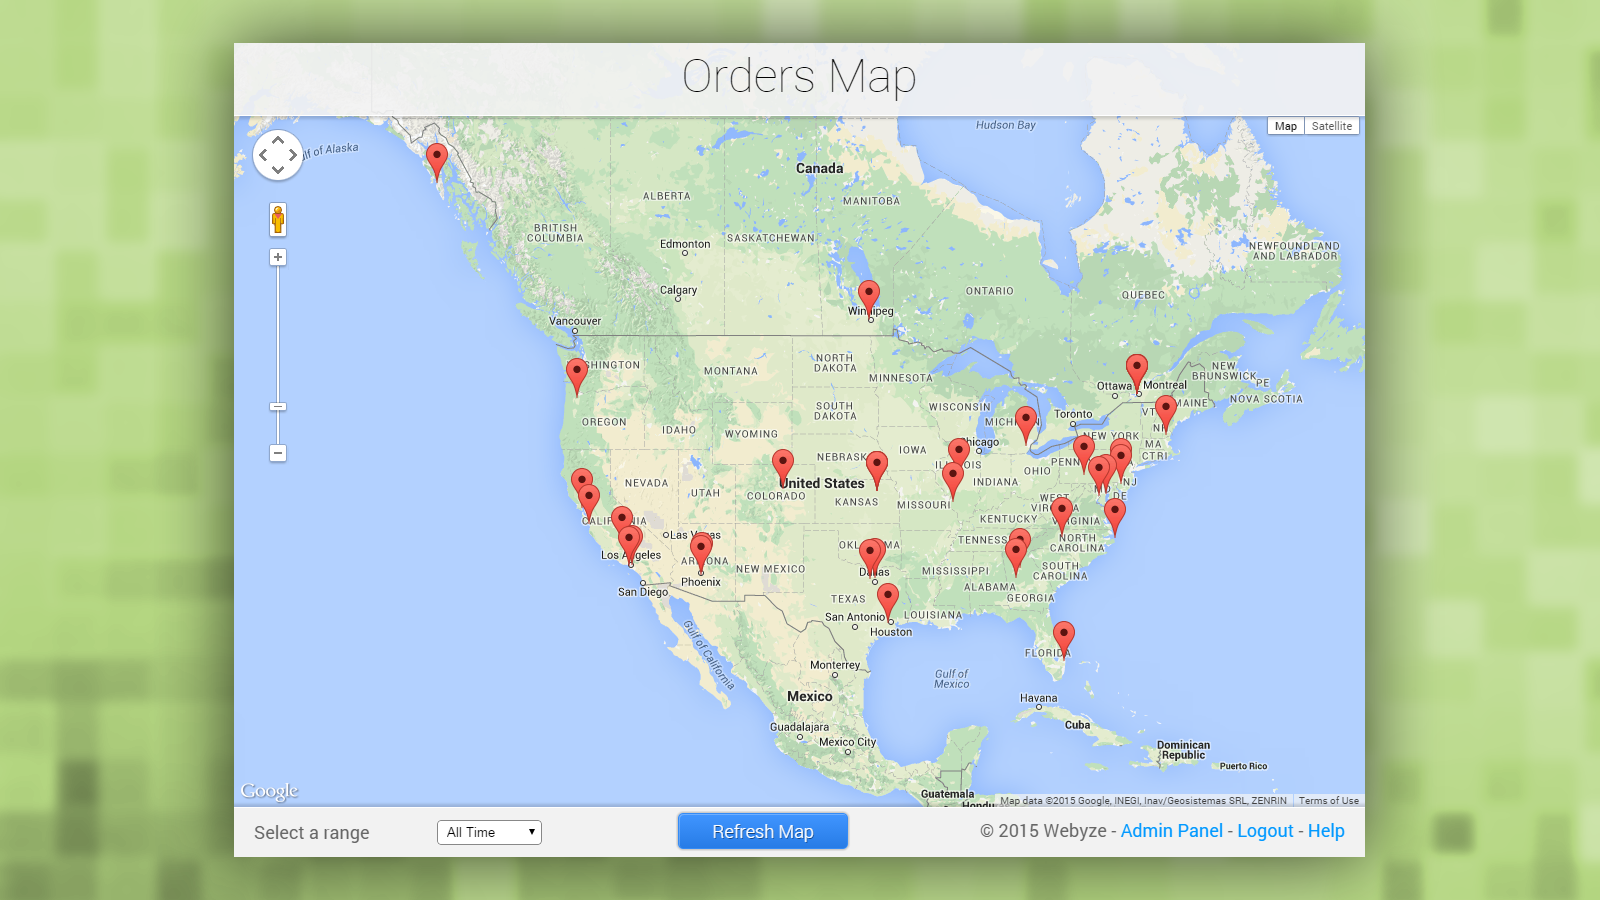 All orders on the map